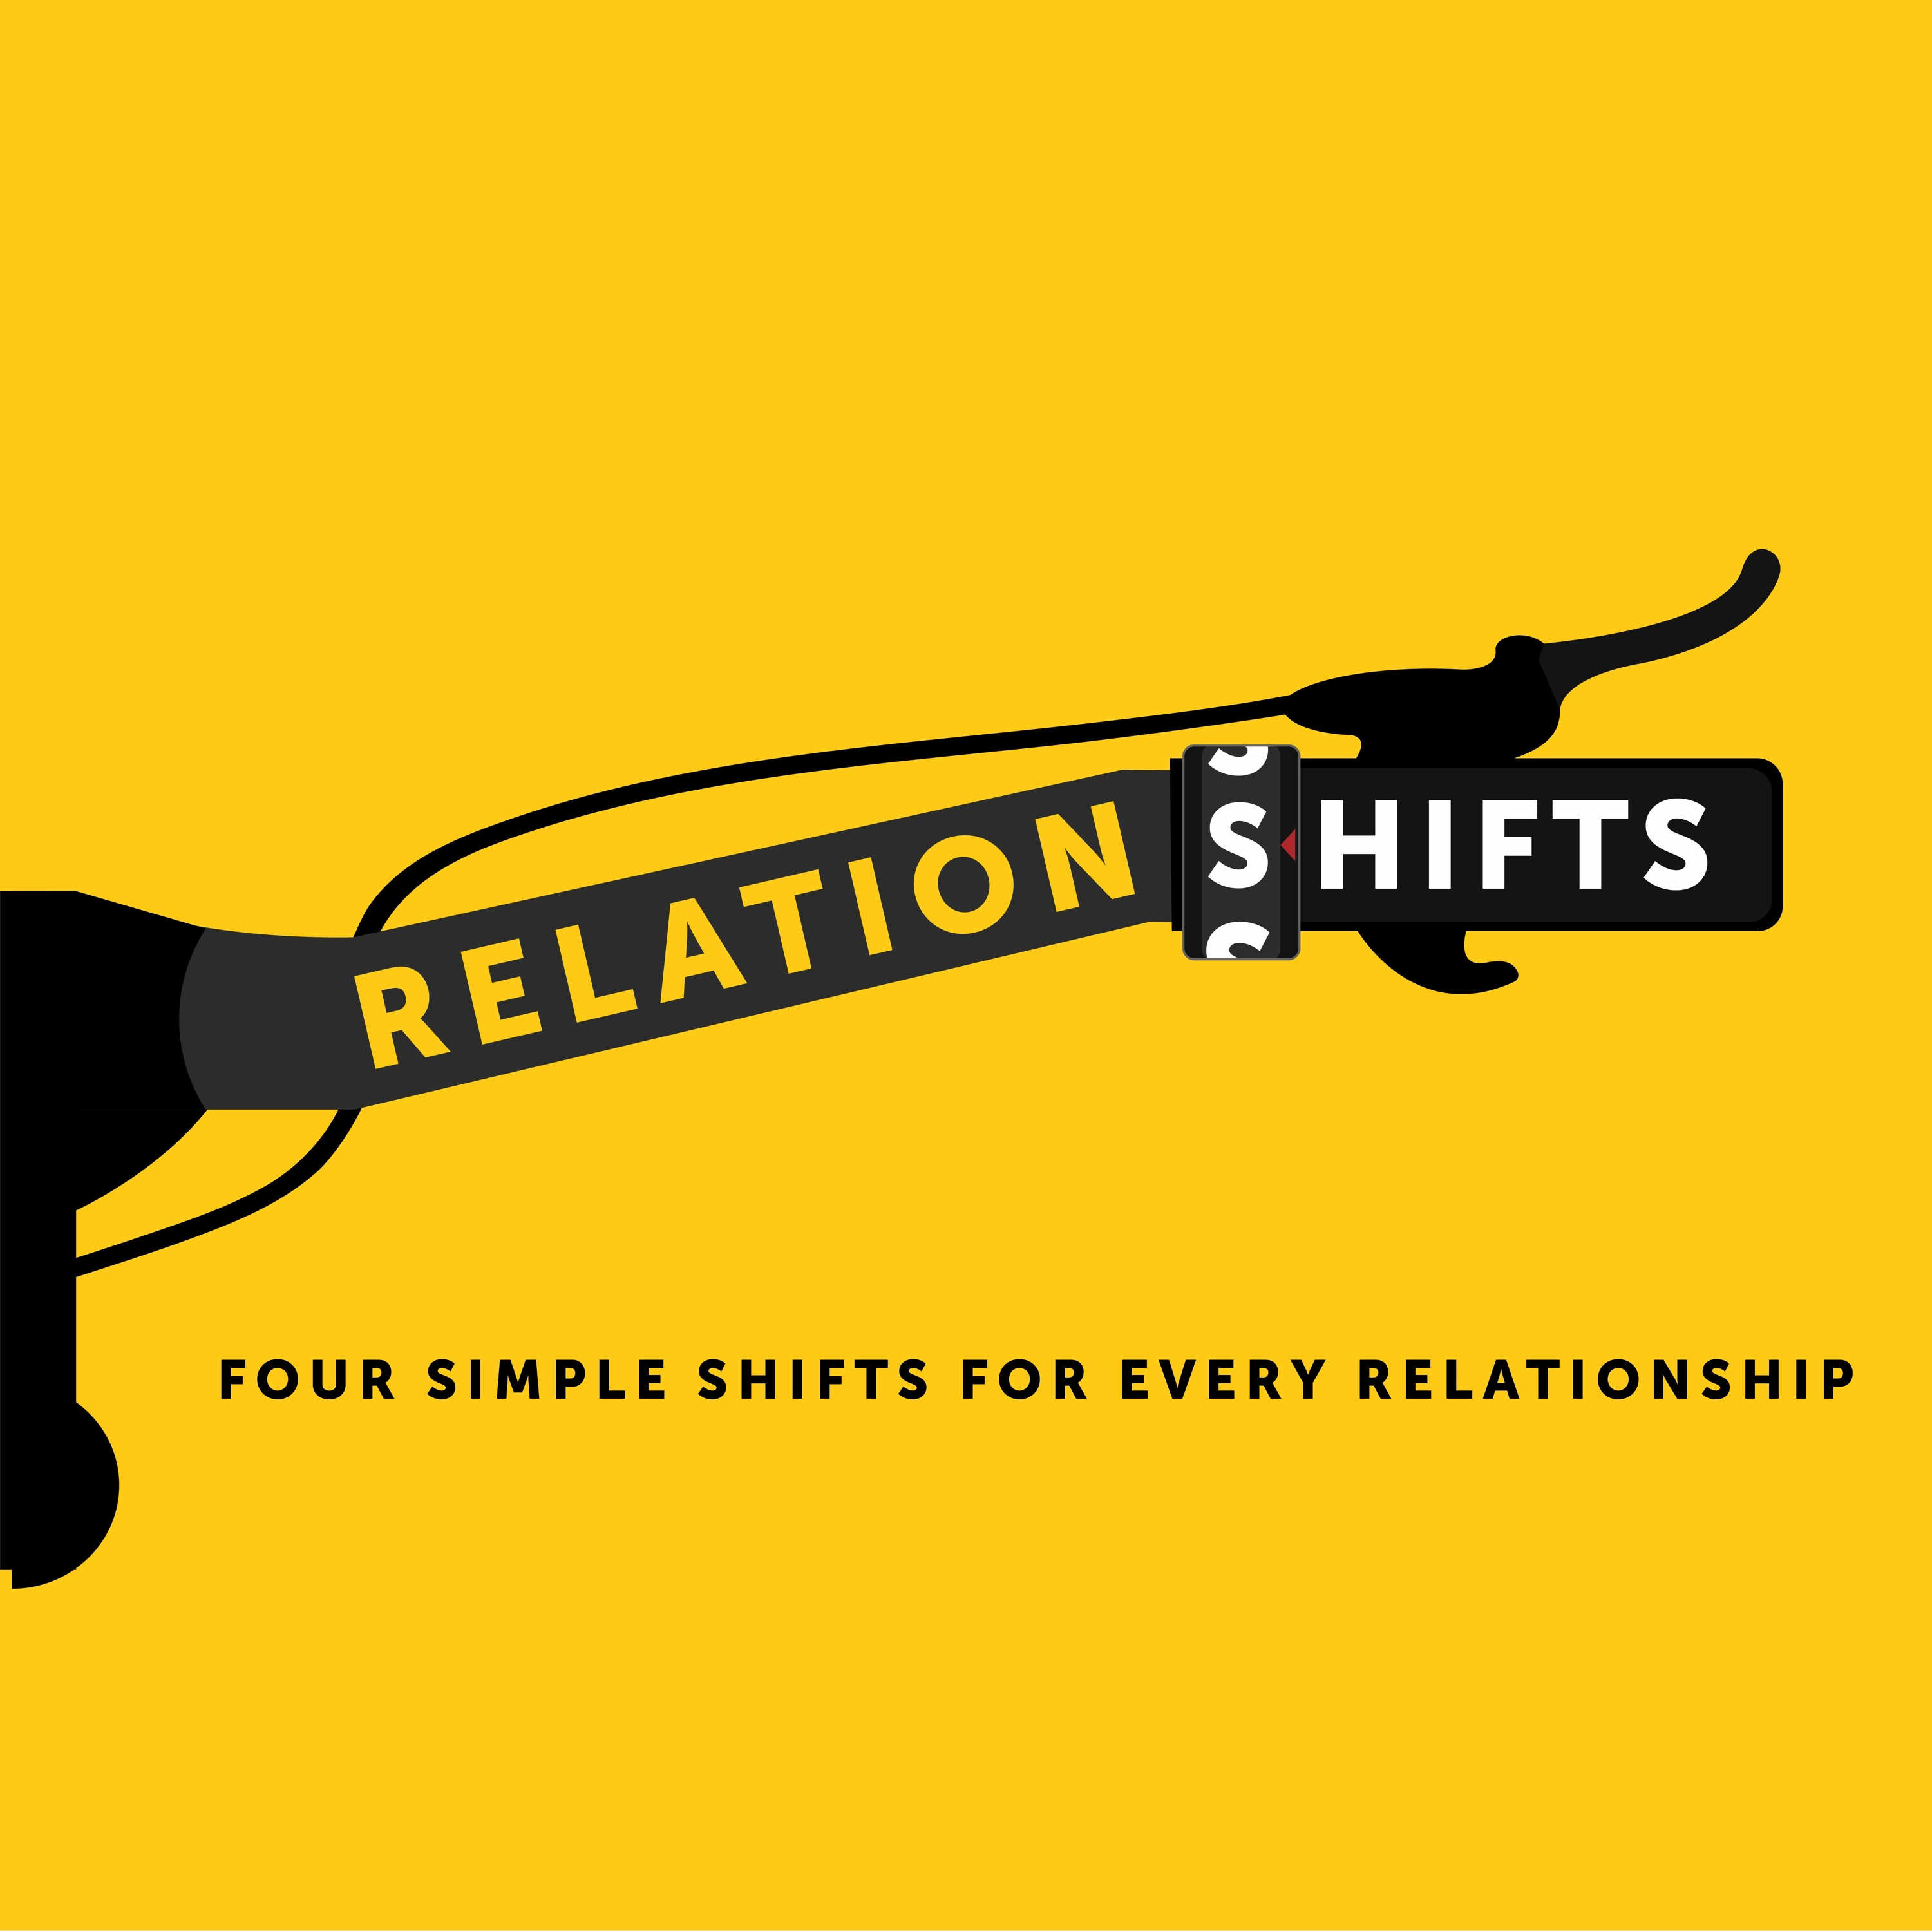 Conflict to Curious Conversation | RelationShifts | Ethan Magness